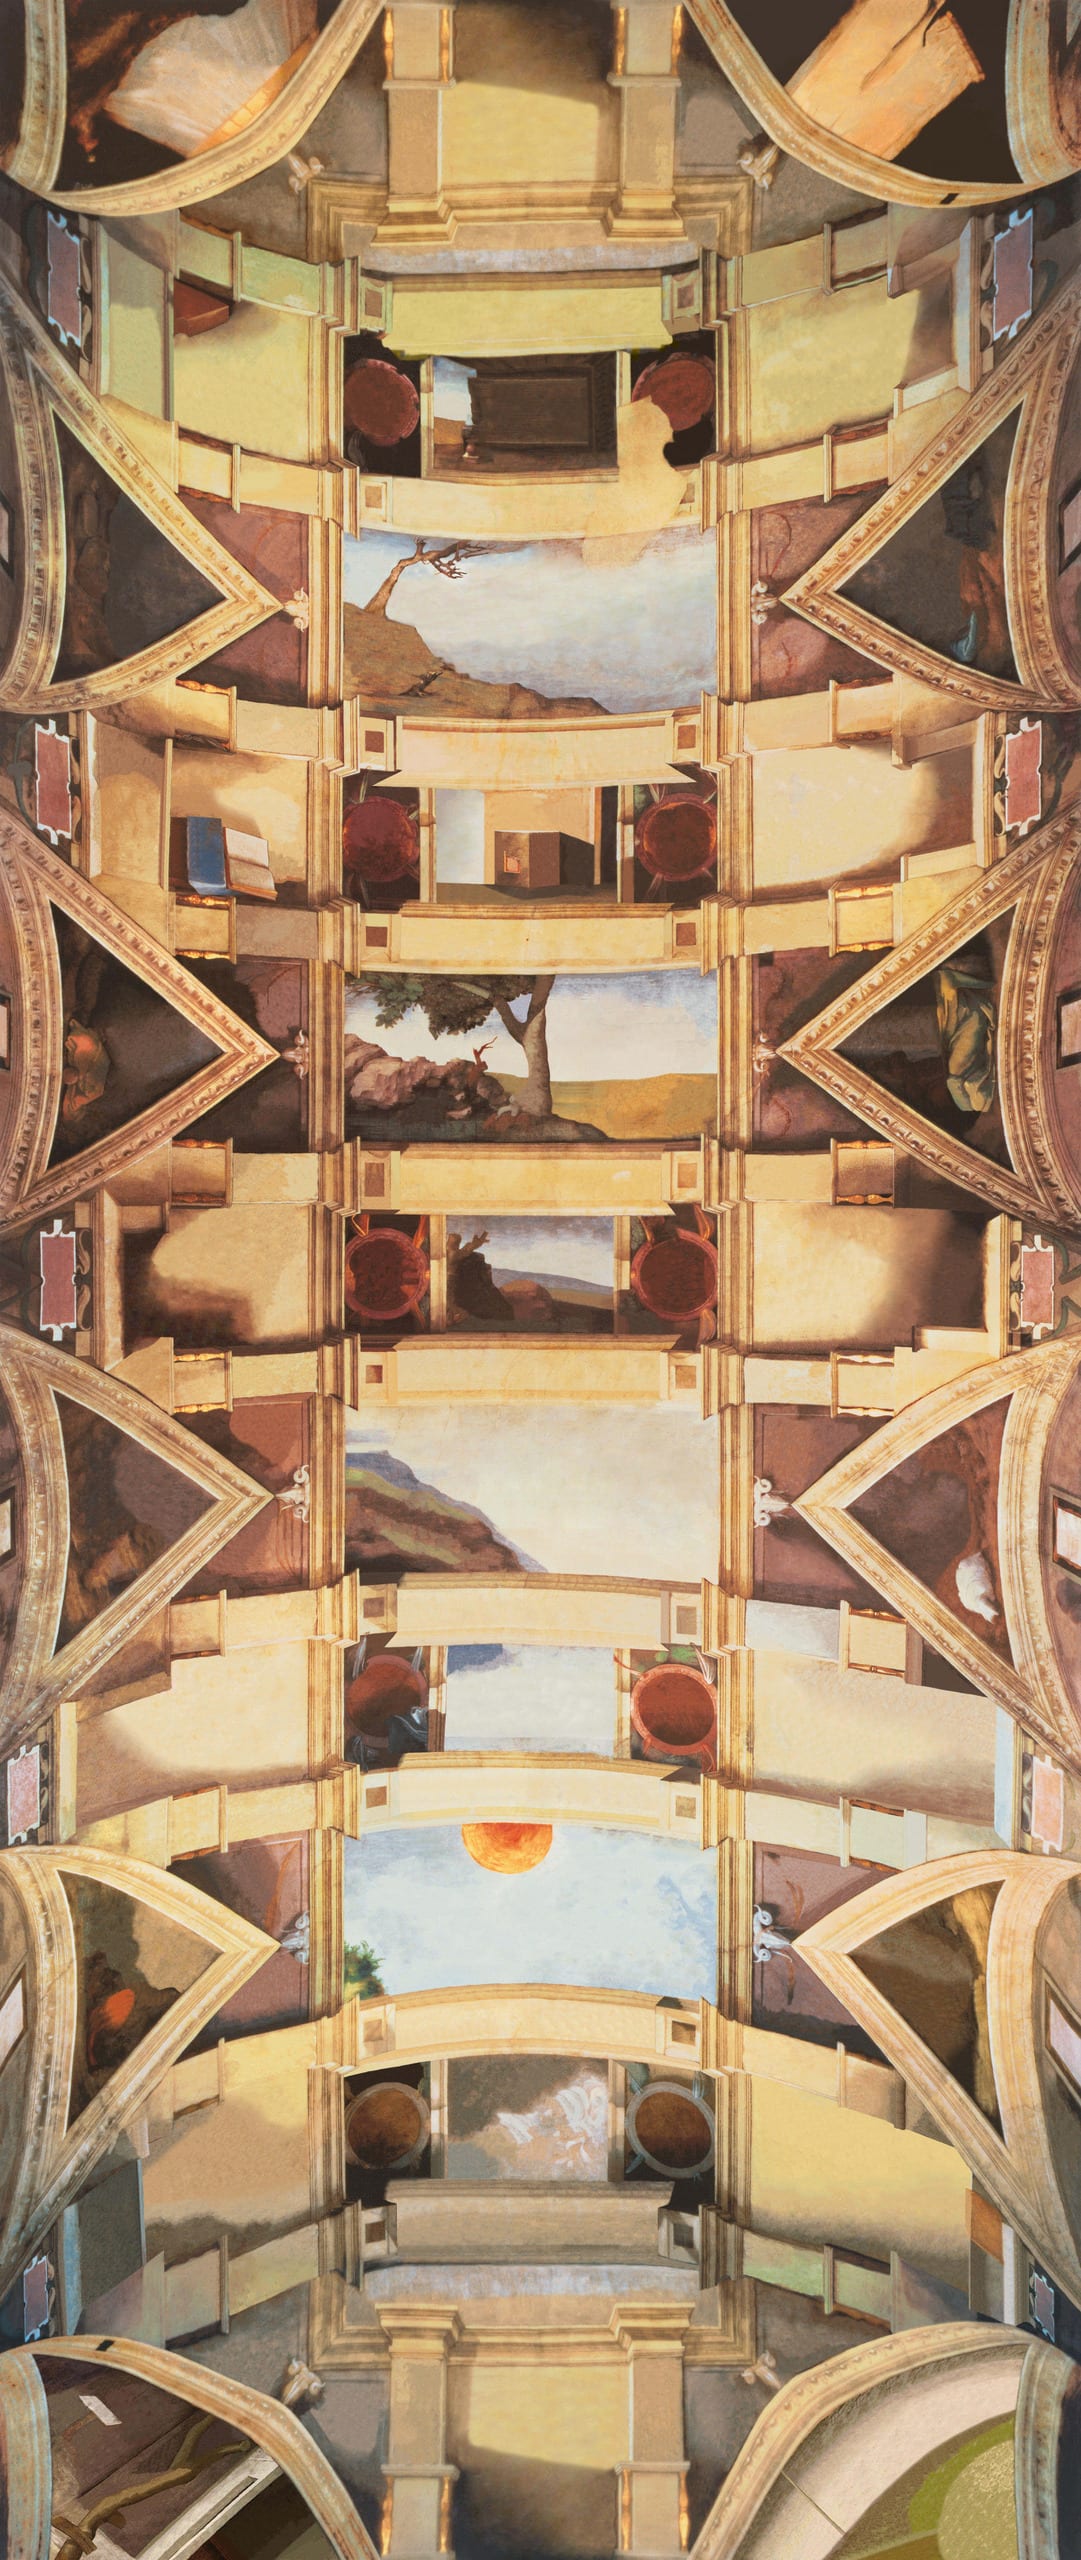 I used Photoshop to erase all the figures in a reproduction of Michelangelo’s Sistine Chapel ceiling fresco.